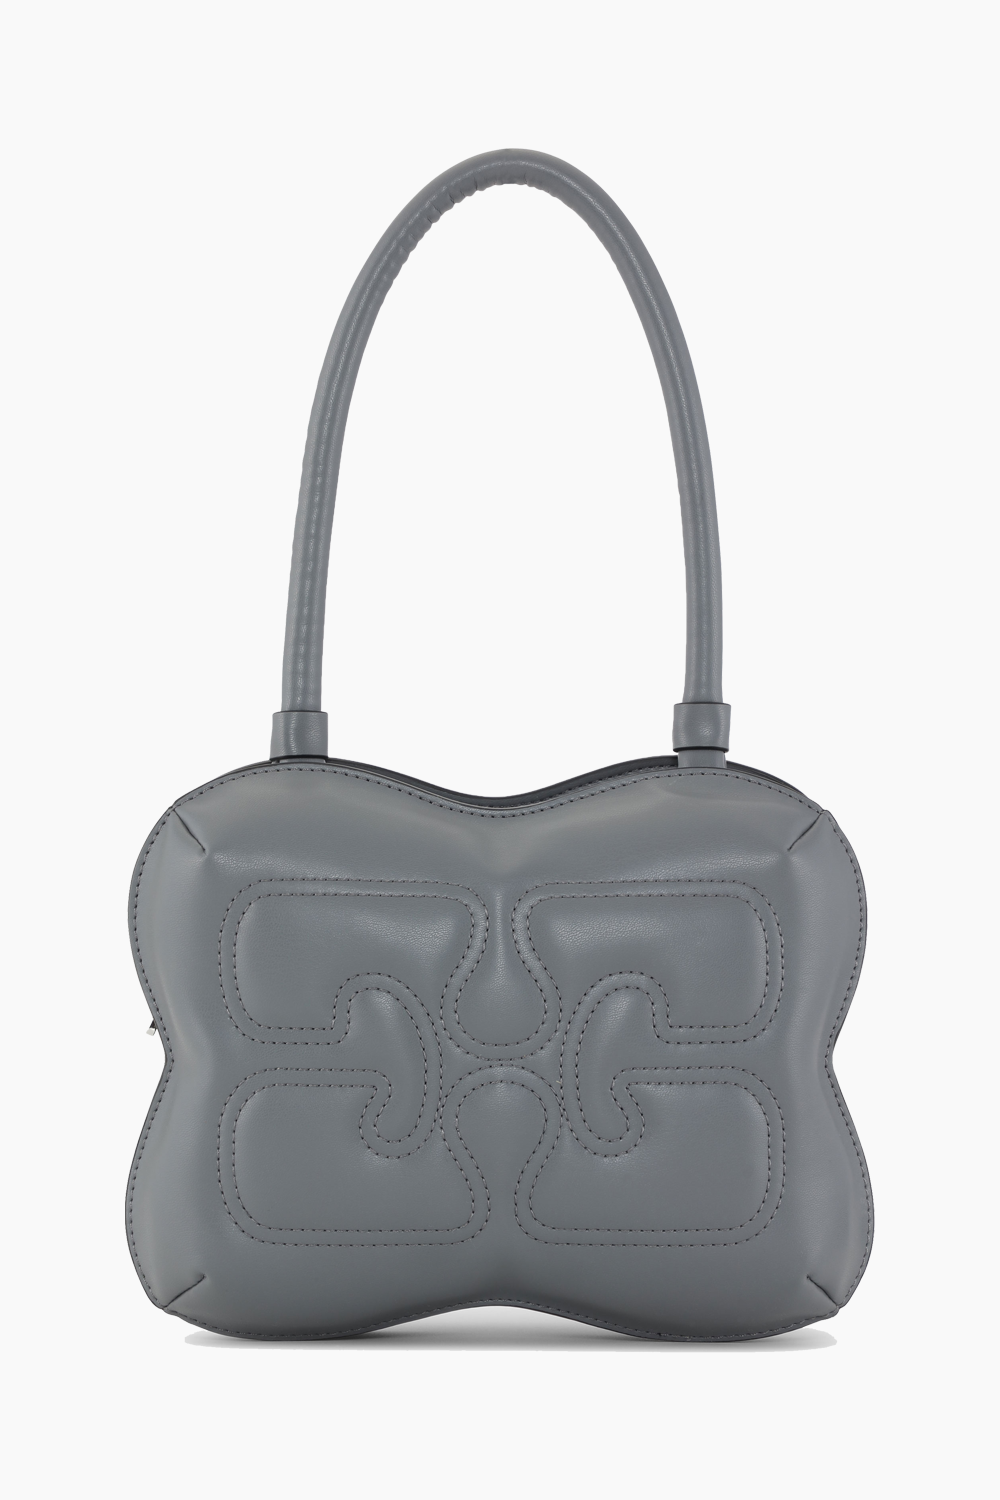 Butterfly Top Handle Bag A5209 - Frost Gray - GANNI